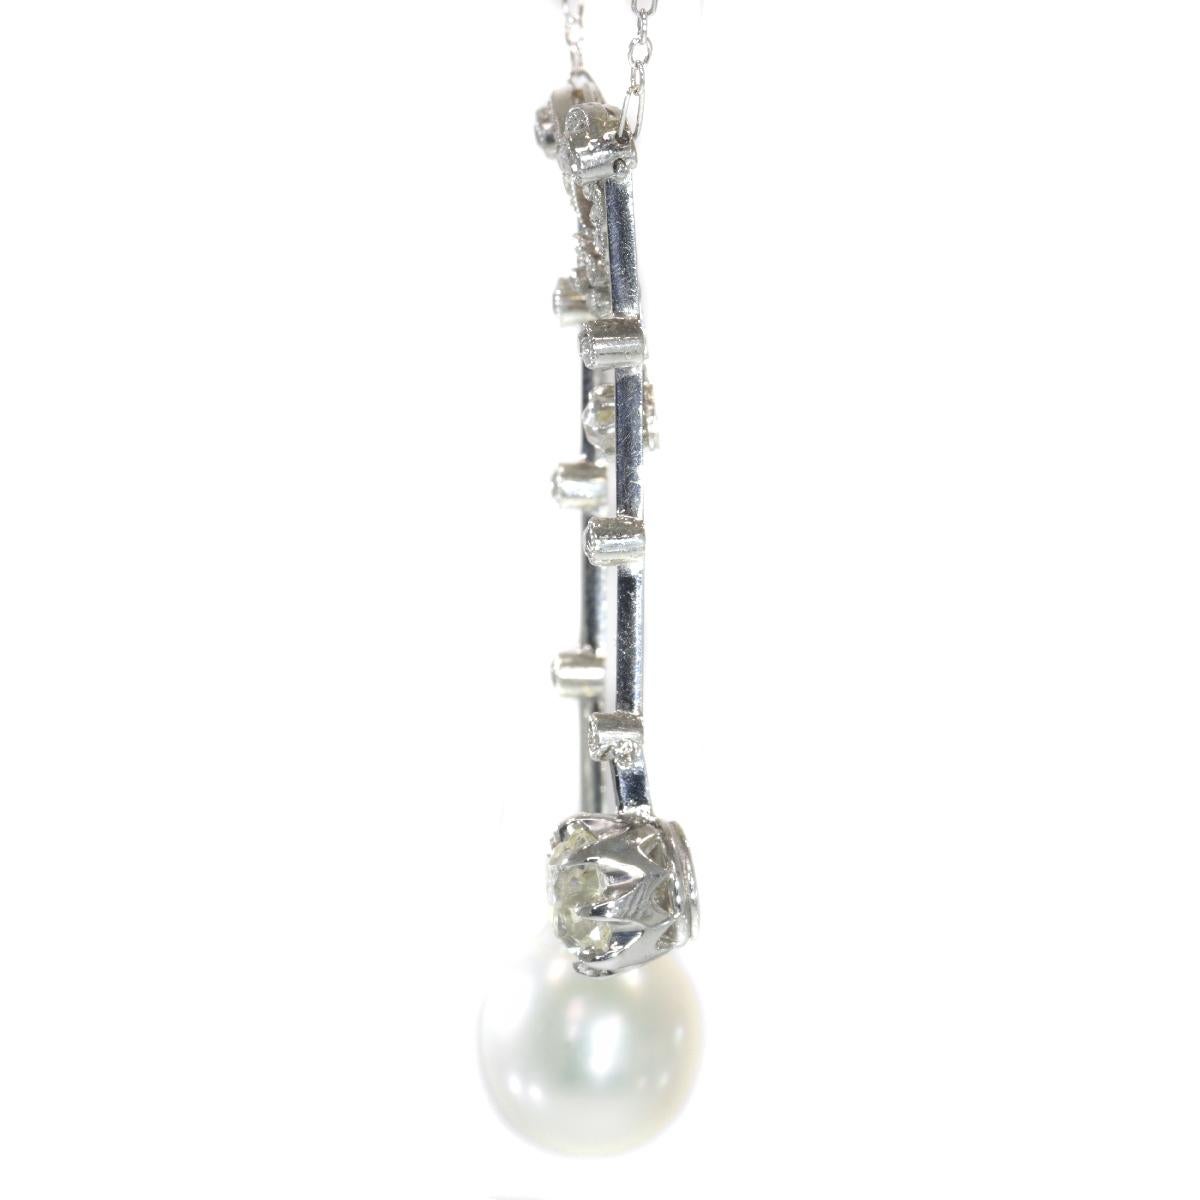 Elegant French Belle Epoque Platinum Diamond Pearl Necklace So-Called Négligé In Excellent Condition For Sale In Antwerp, BE